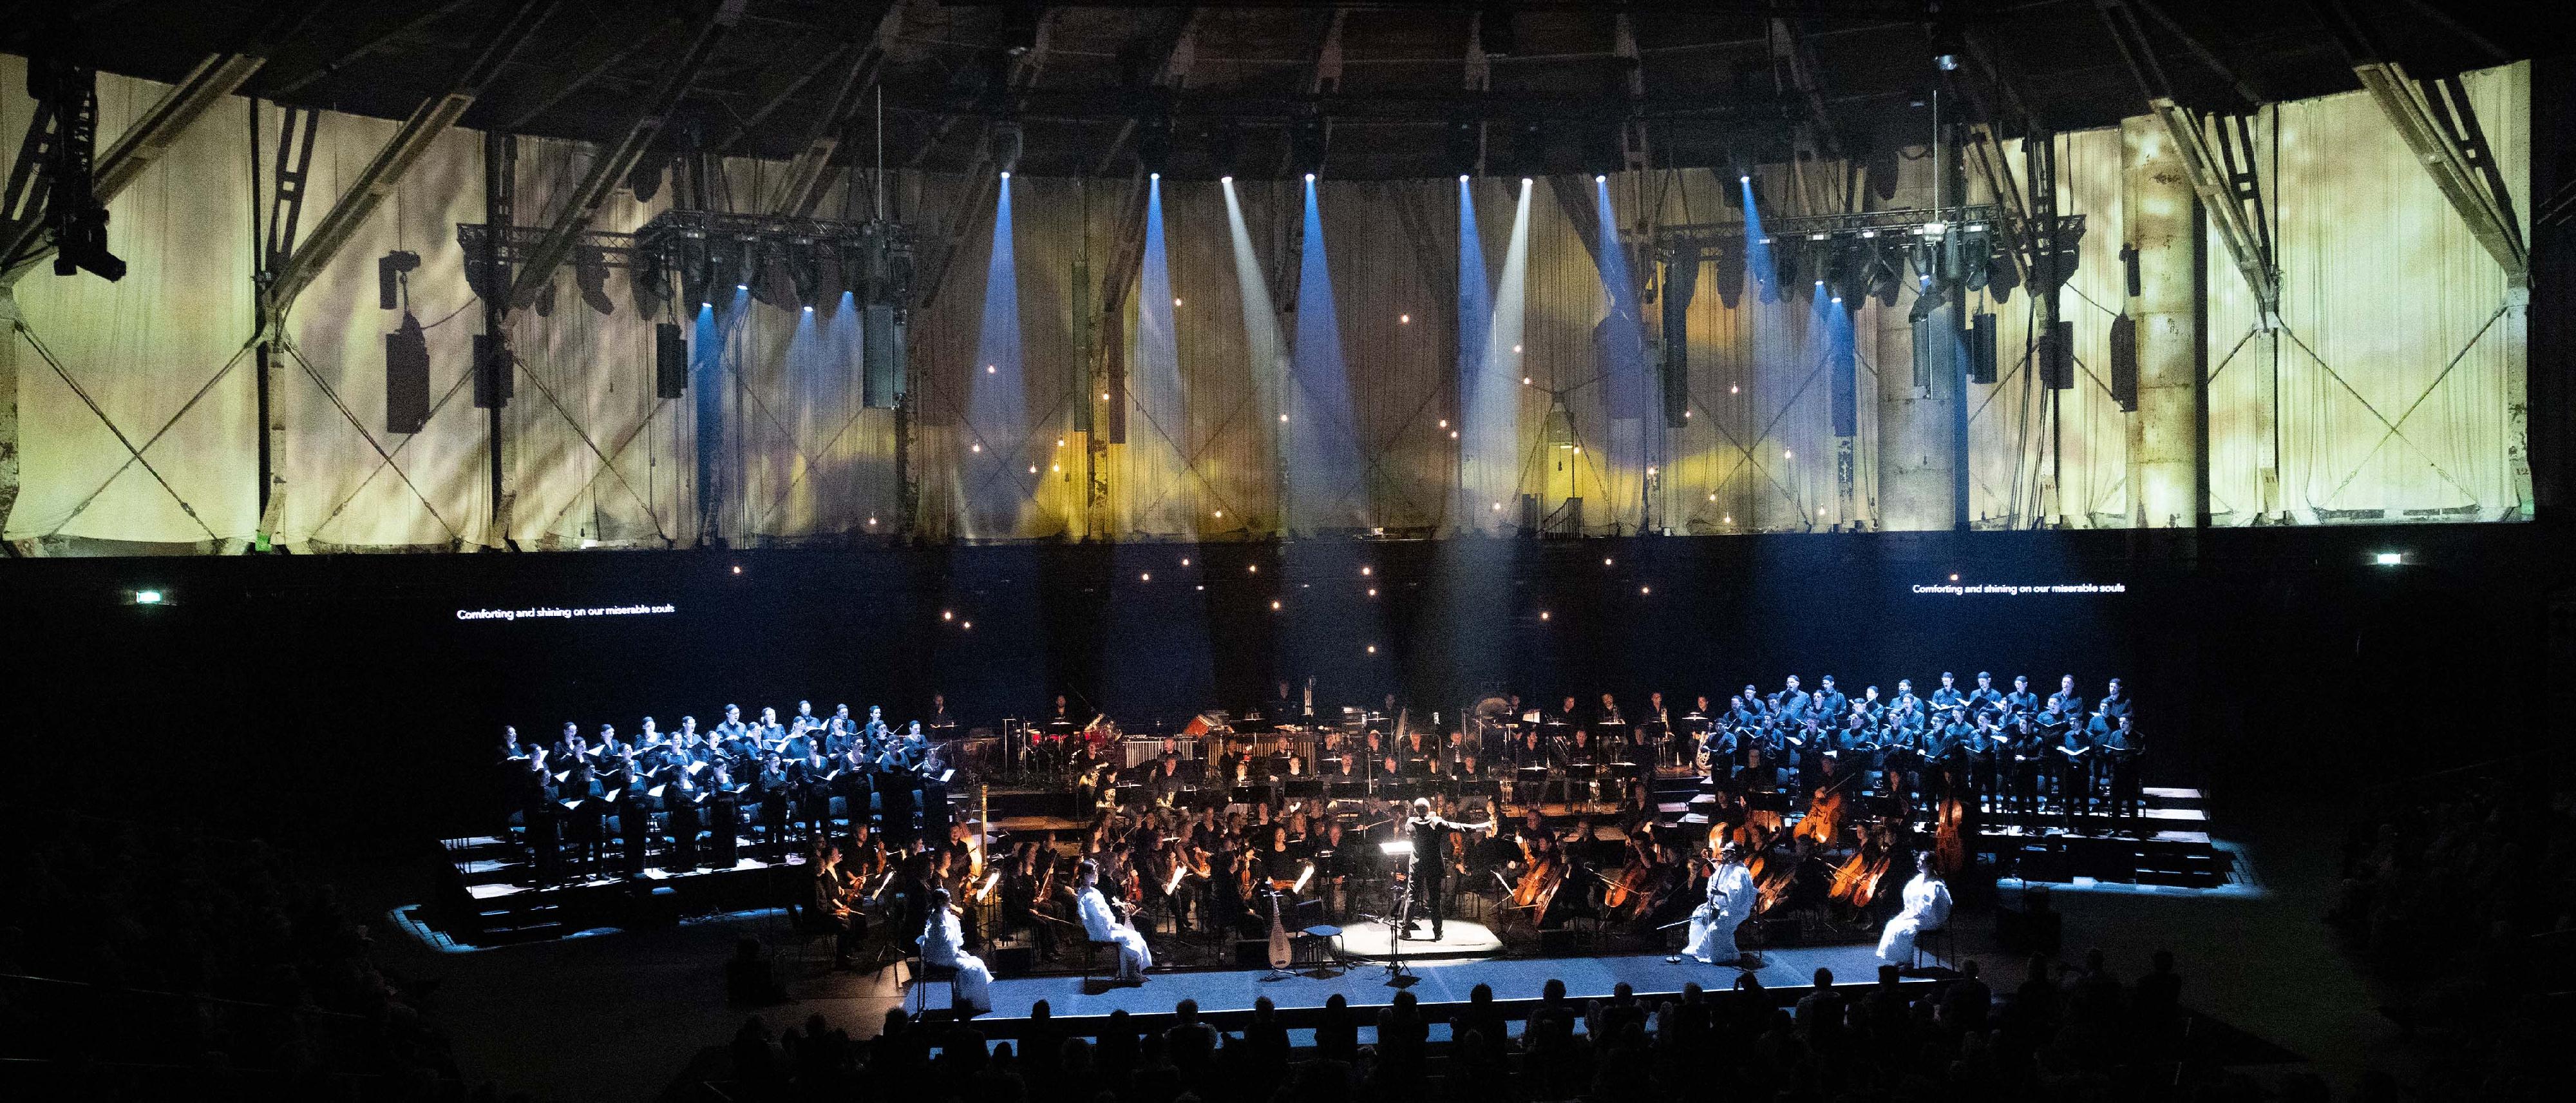 Hong Kong's Ambassador for Cultural Promotion Tan Dun invited Hong Kong young soprano Candice Chung to perform the world premiere of "Requiem for Nature" at the 76th edition of the Holland Festival. Photo shows the "Requiem for Nature" concert.